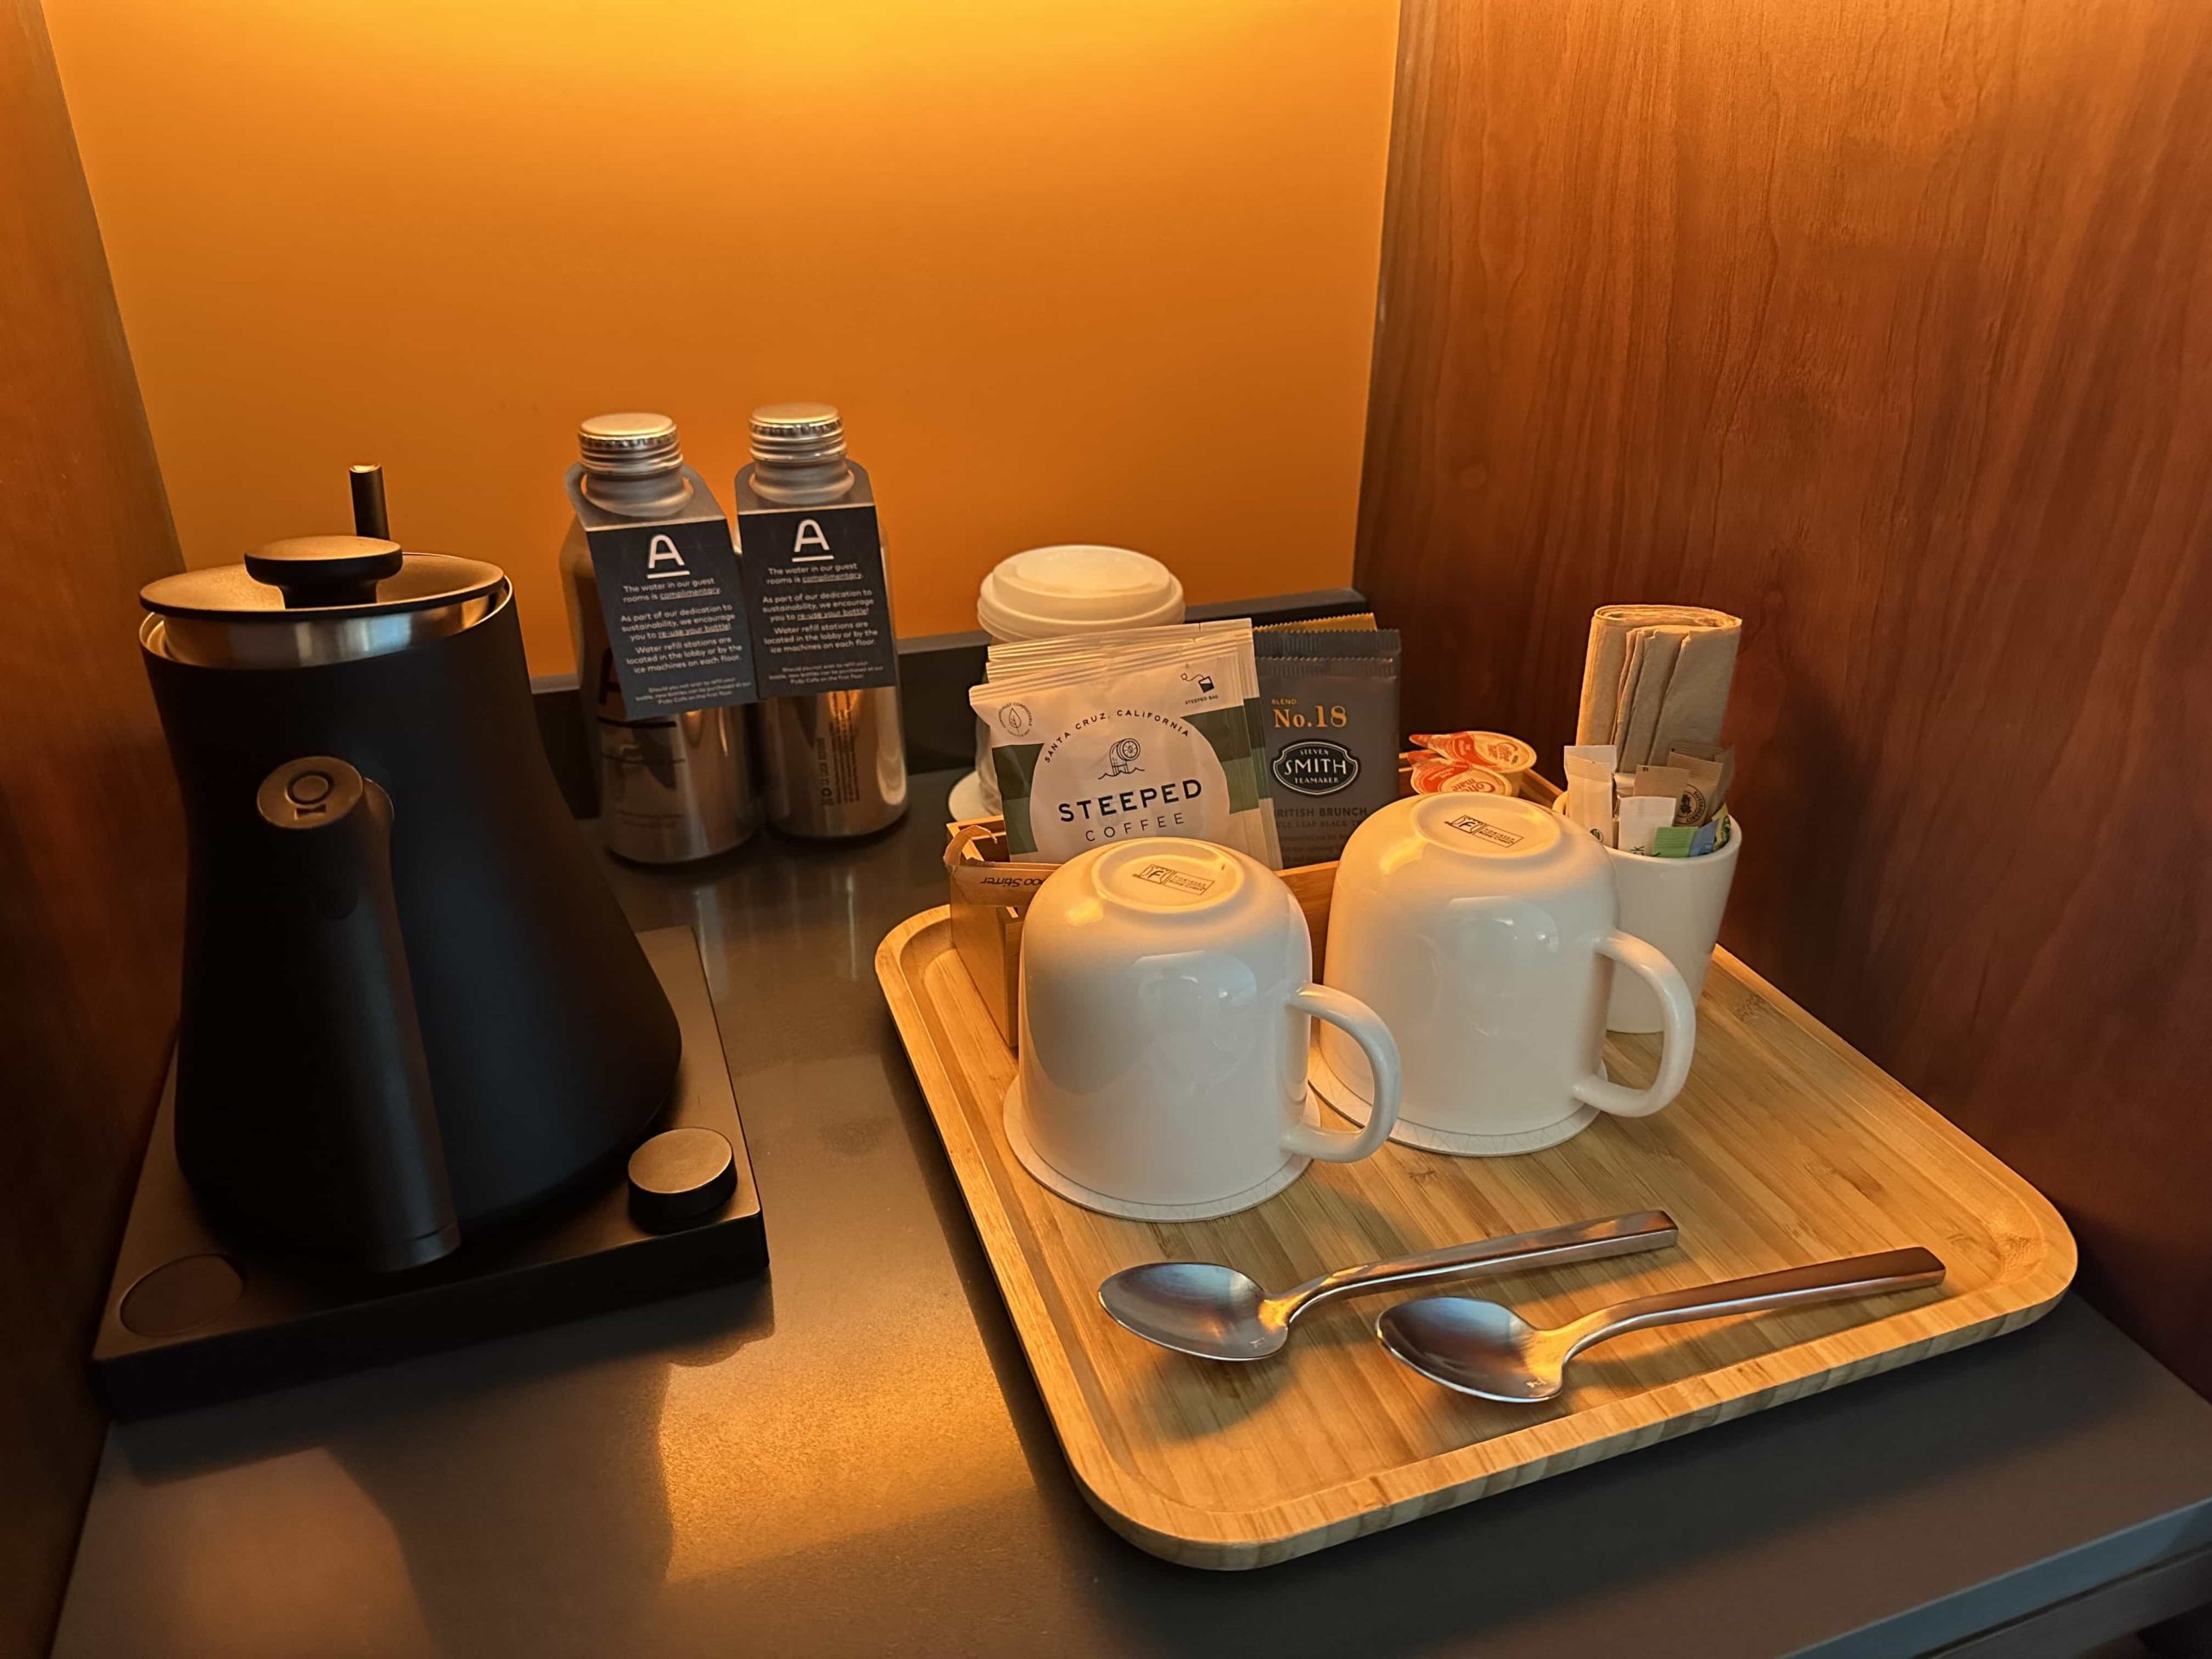 A kettle, coffee and tea packets, mugs, and aluminium water bottles